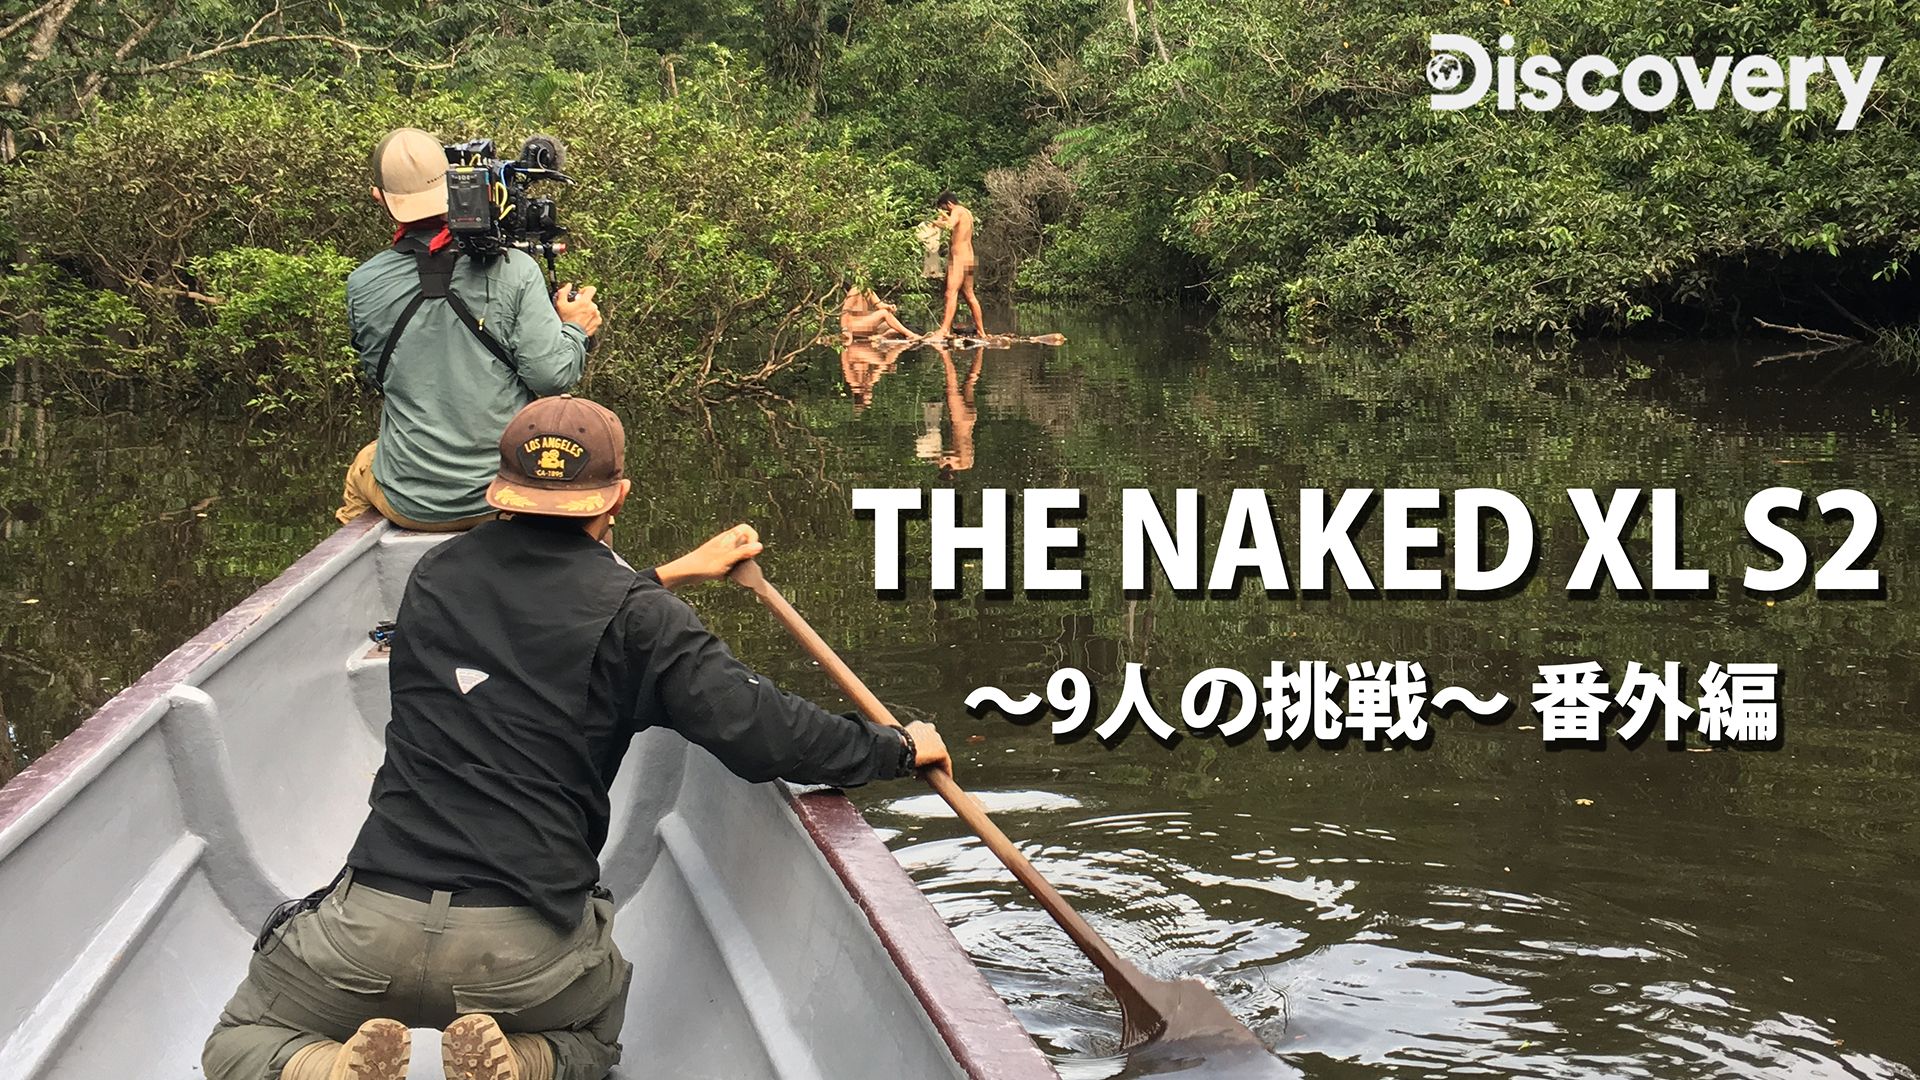 THE NAKED XL シーズン2 〜9人の挑戦〜 番外編